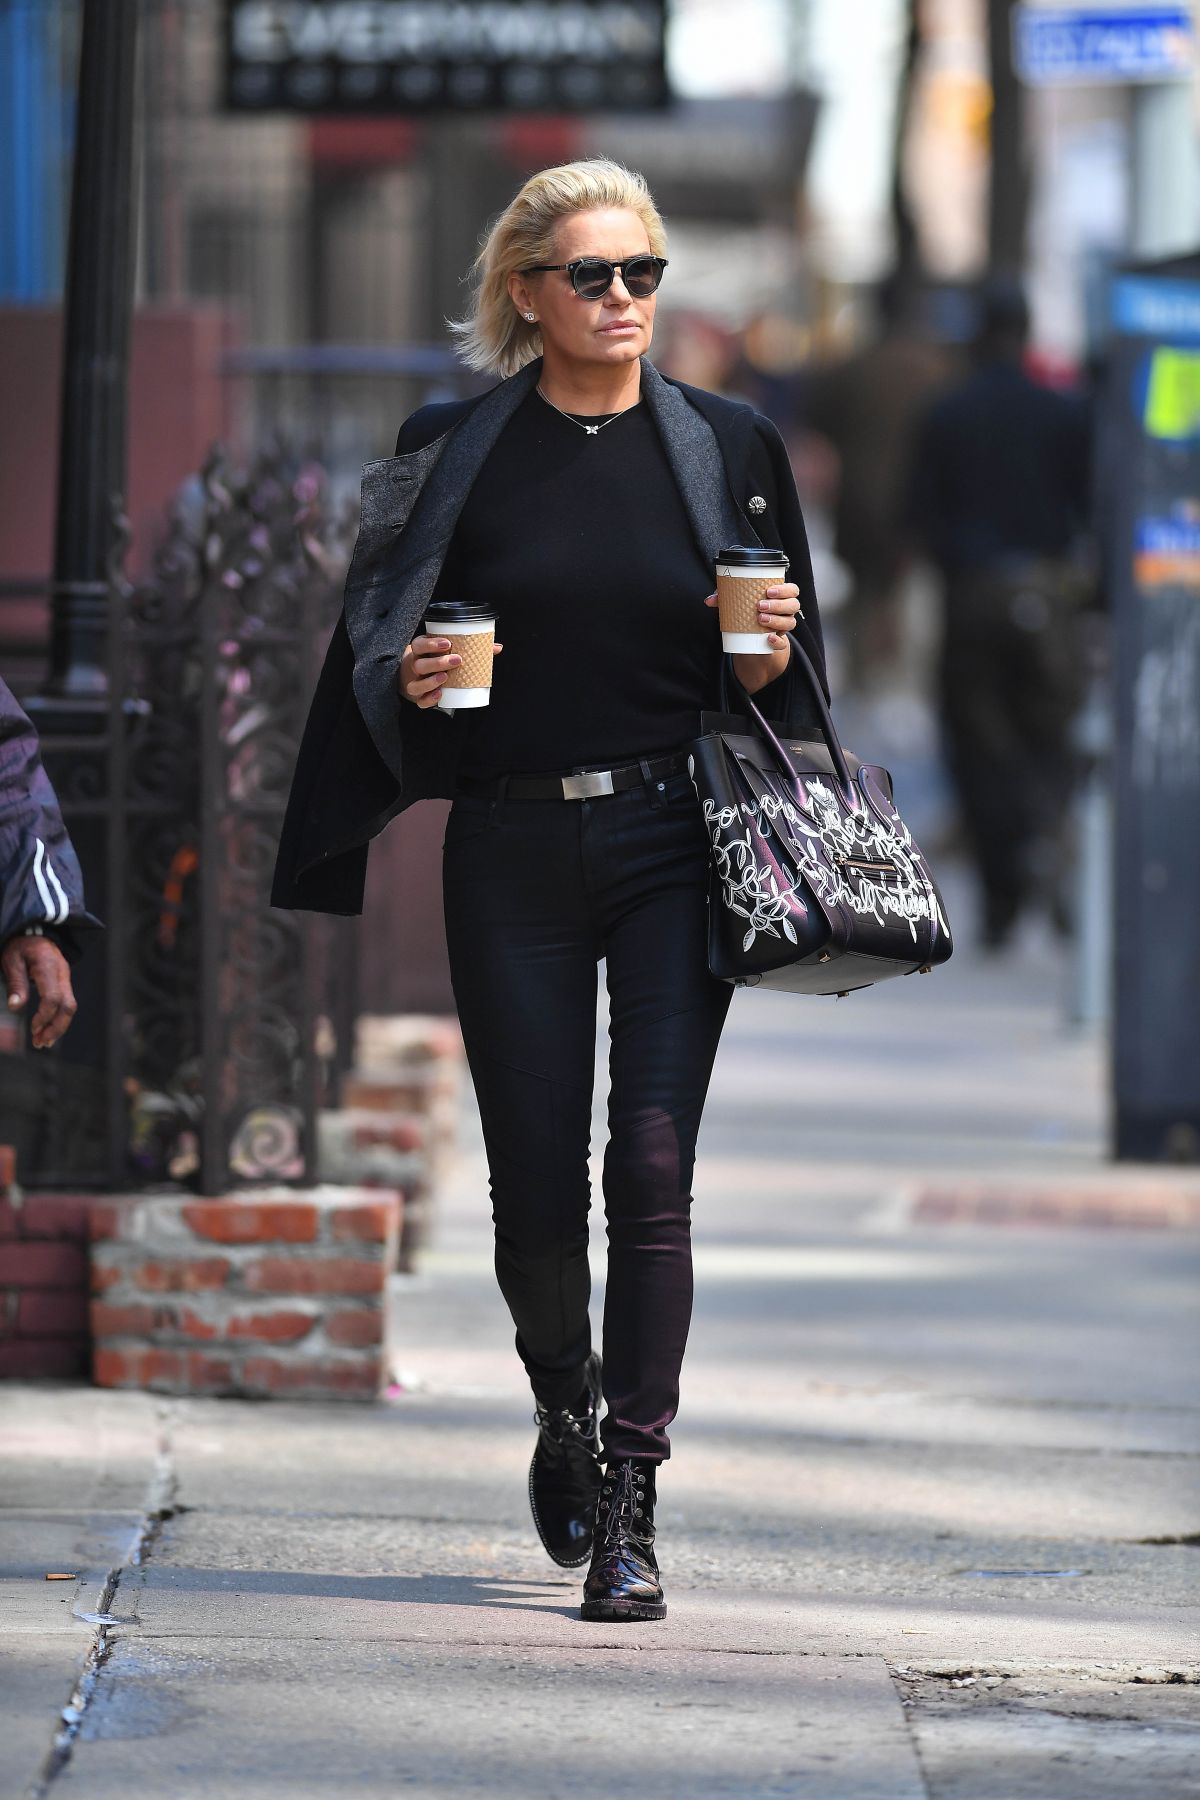 YOLANDA HADID Out and About in New York 04/10/2017 – HawtCelebs